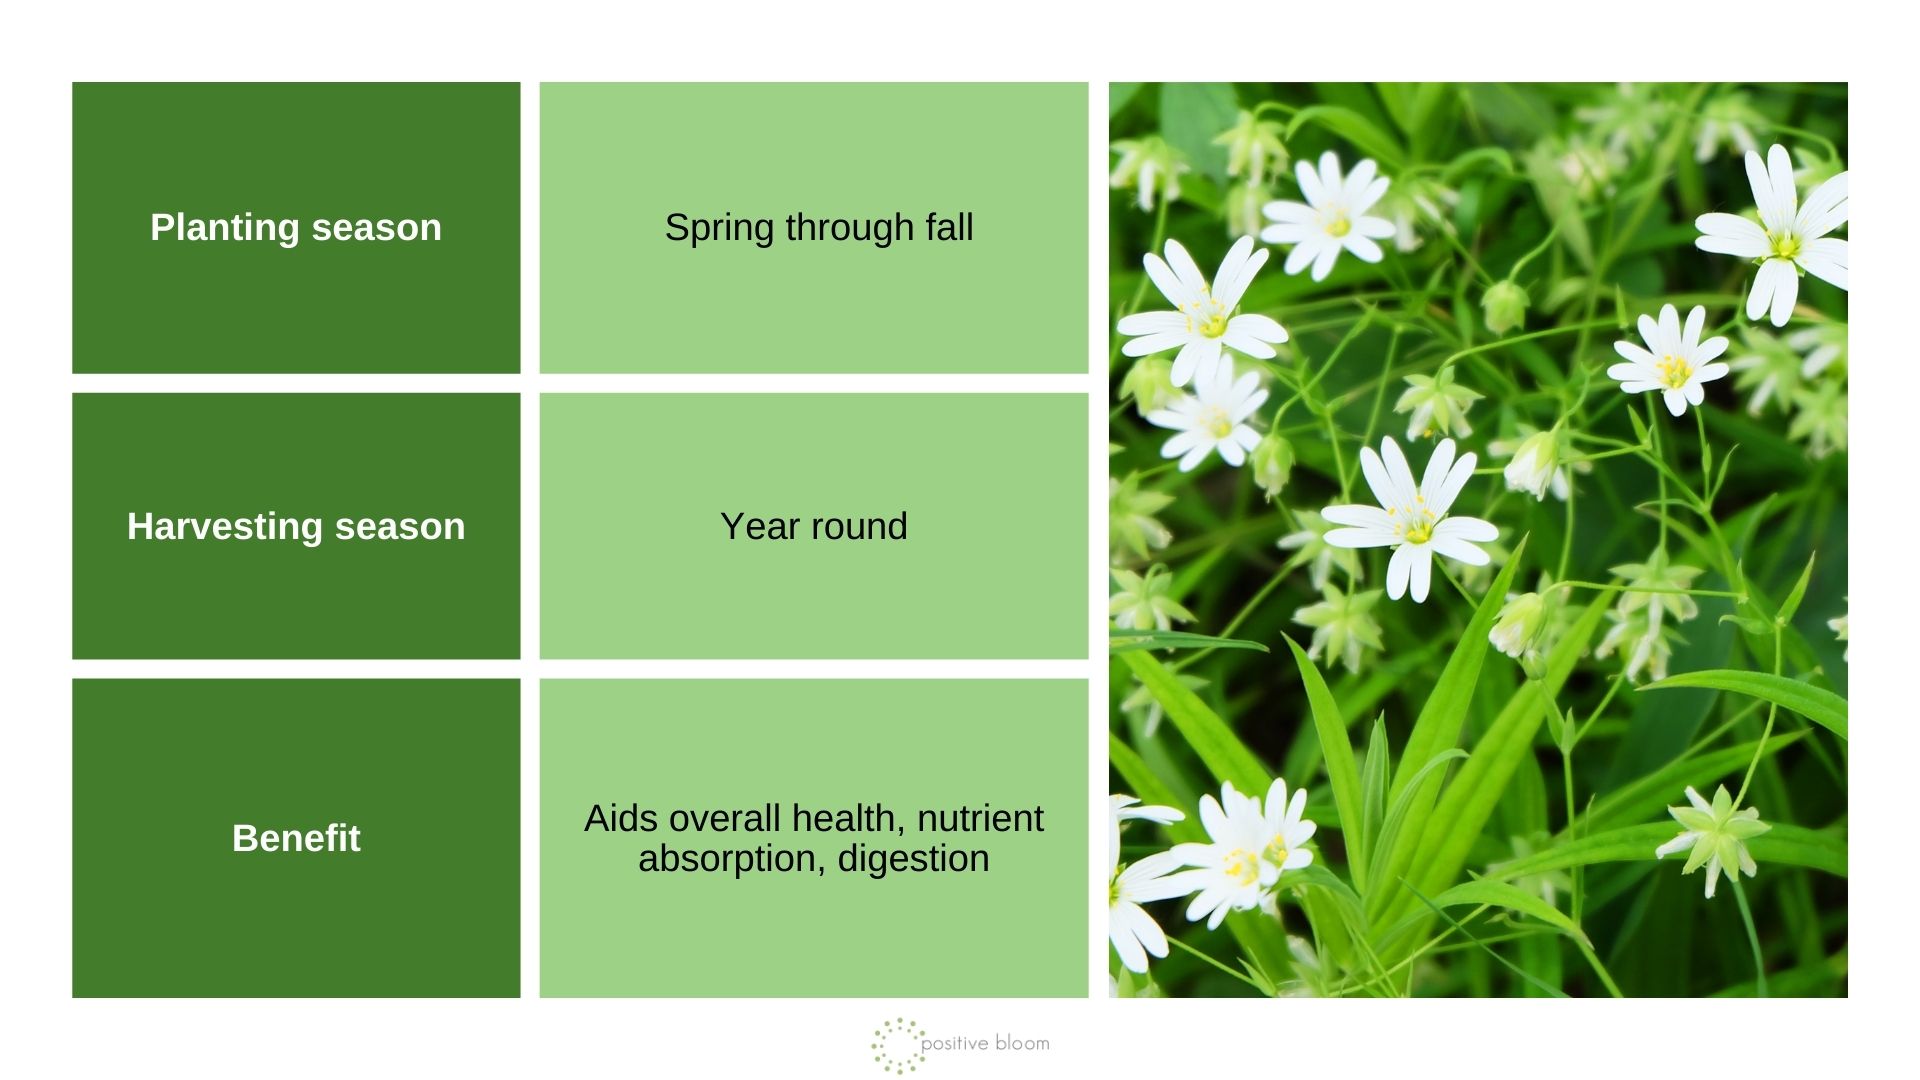 Chickweed info chart and photo